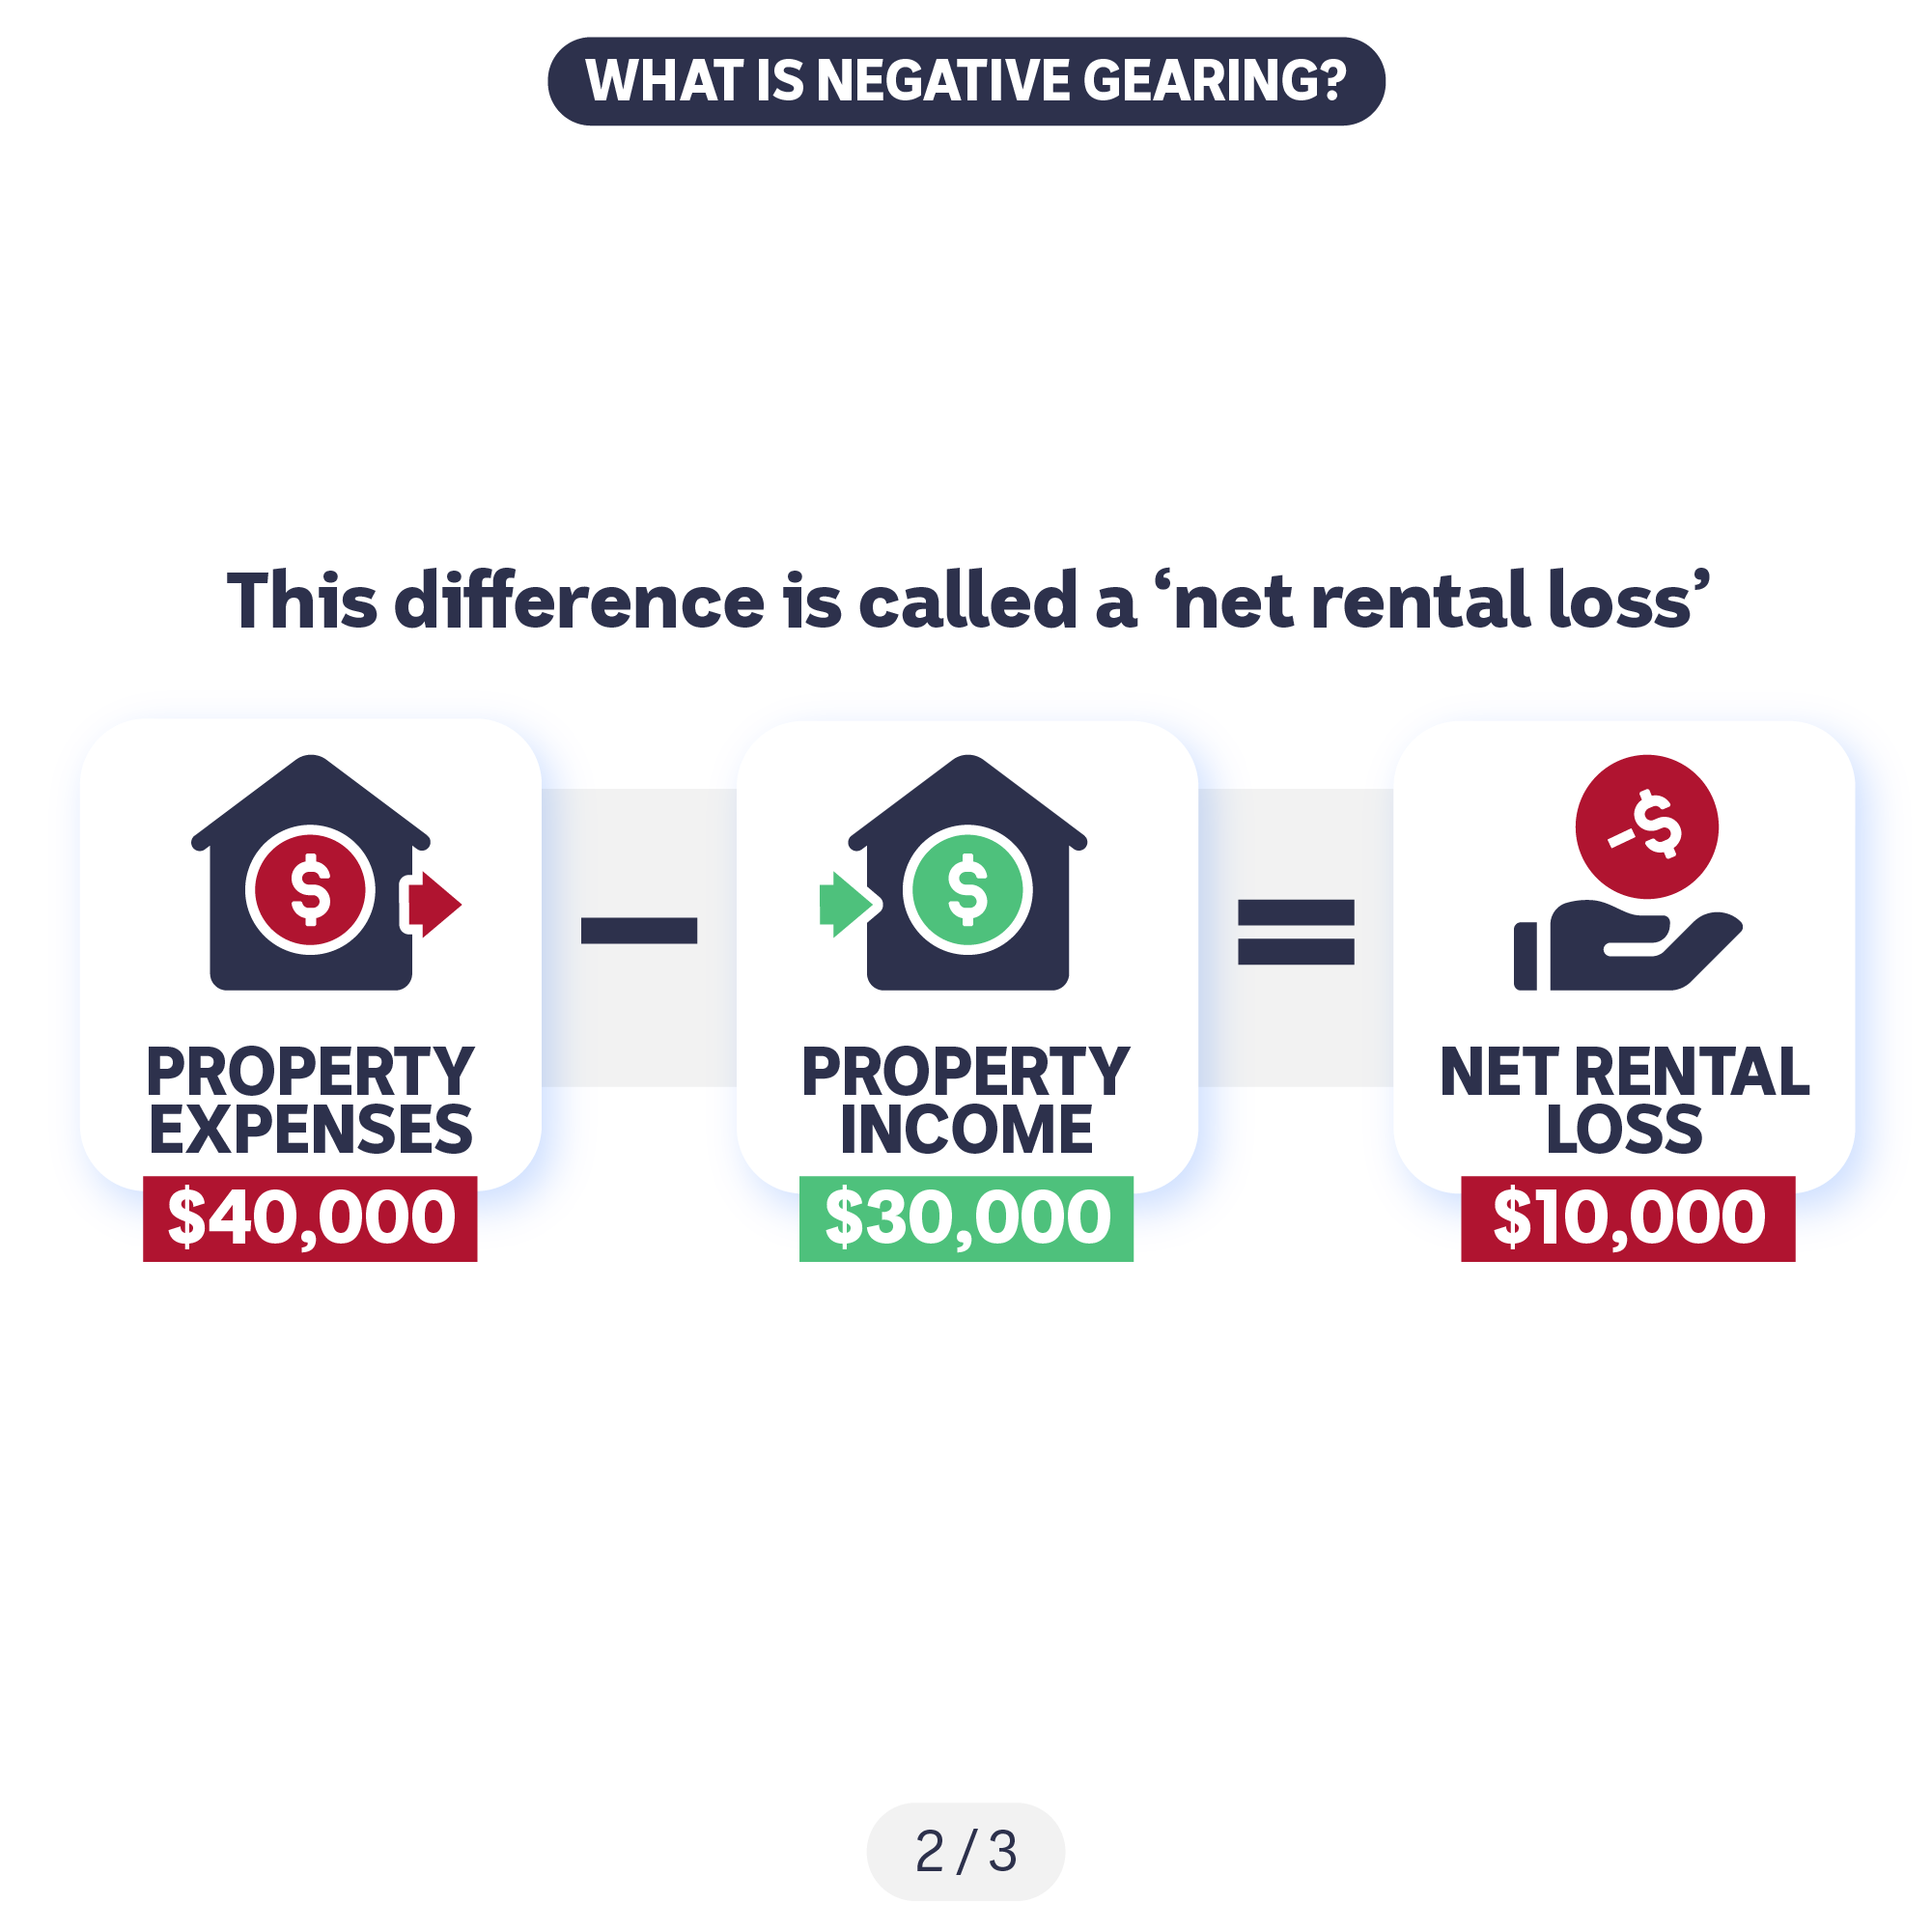 Boxes with an icon for property expenses being subtracted from property income and equalling net rental loss